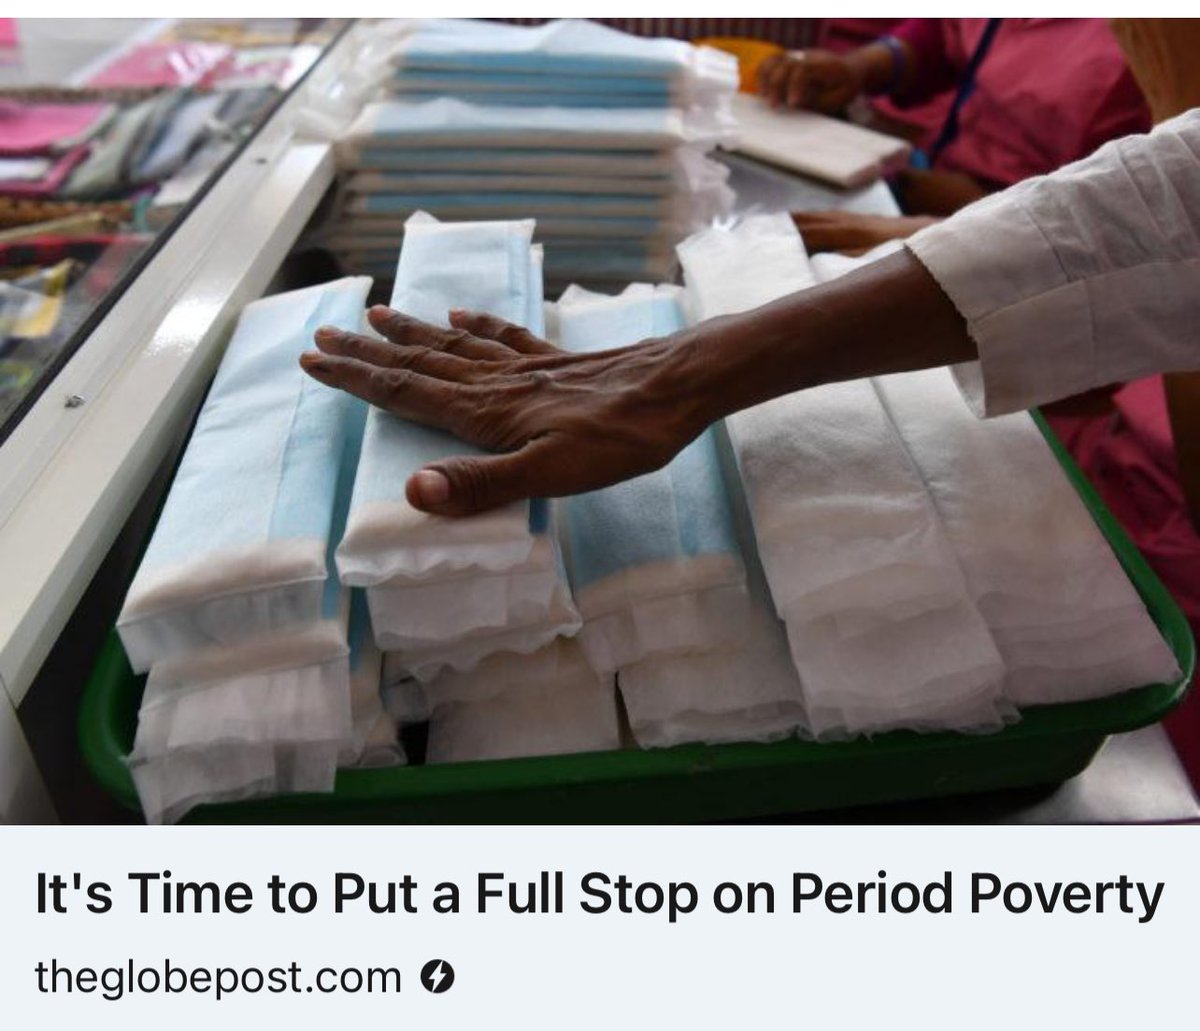 Today is Menstrual Hygiene Day. Sadly, millions of girls experience period poverty. They do not have access to sanitary products. I explain why we must end period poverty in this piece. I am also a proud donor, supporting distribution of free reusable SafePads in Abuja, Nigeria